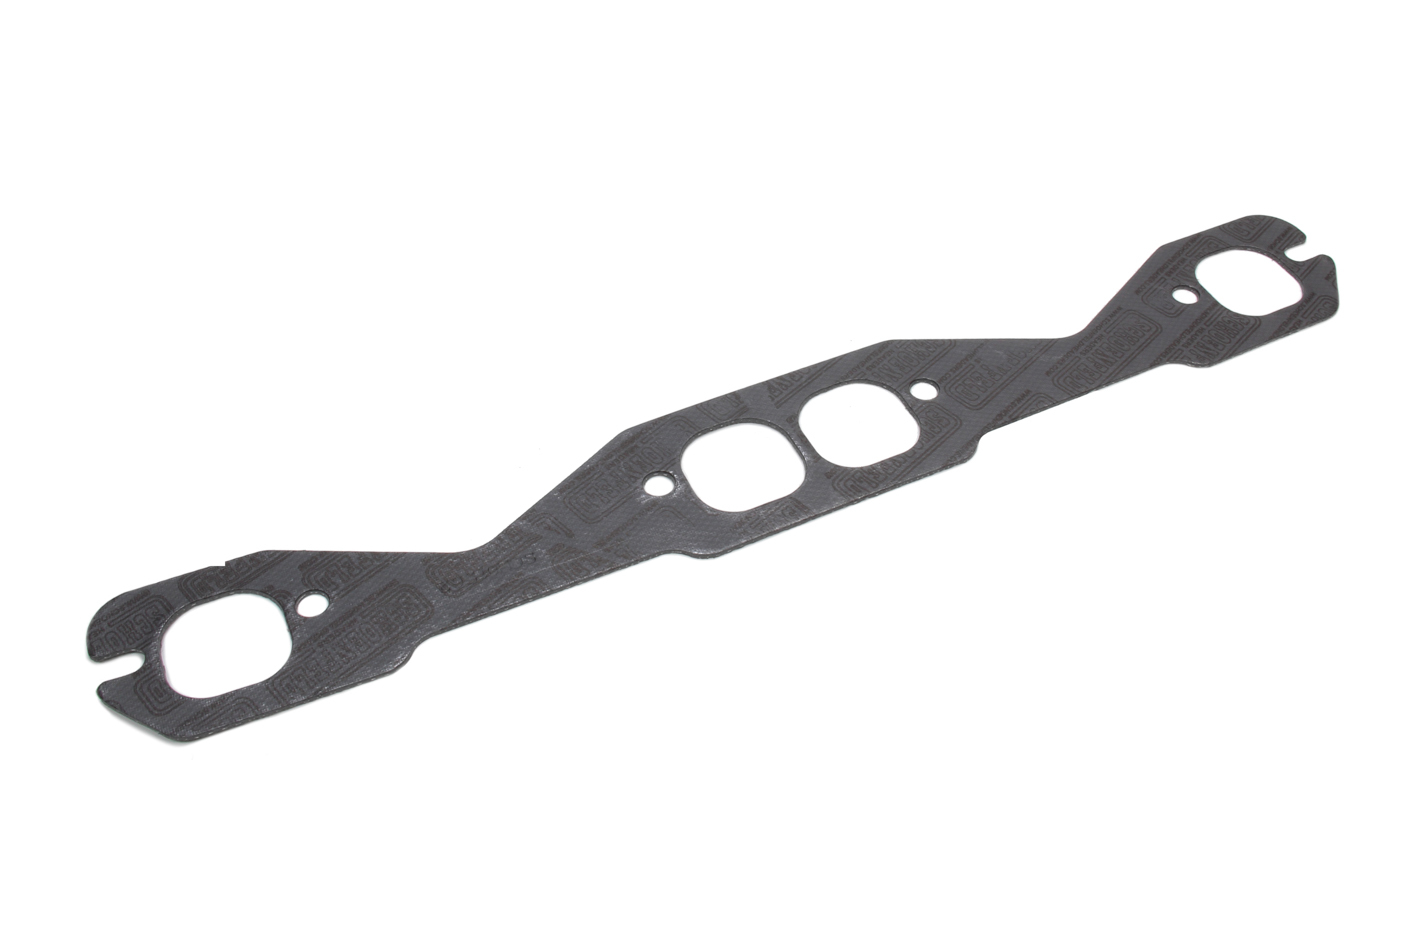 Schoenfeld Headers 01562 - Exhaust Manifold / Header Gasket, 1.500 x 1.450 in Rounded Square Port, Steel Core Graphite, 602 Crate Head, Small Block Chevy, Each